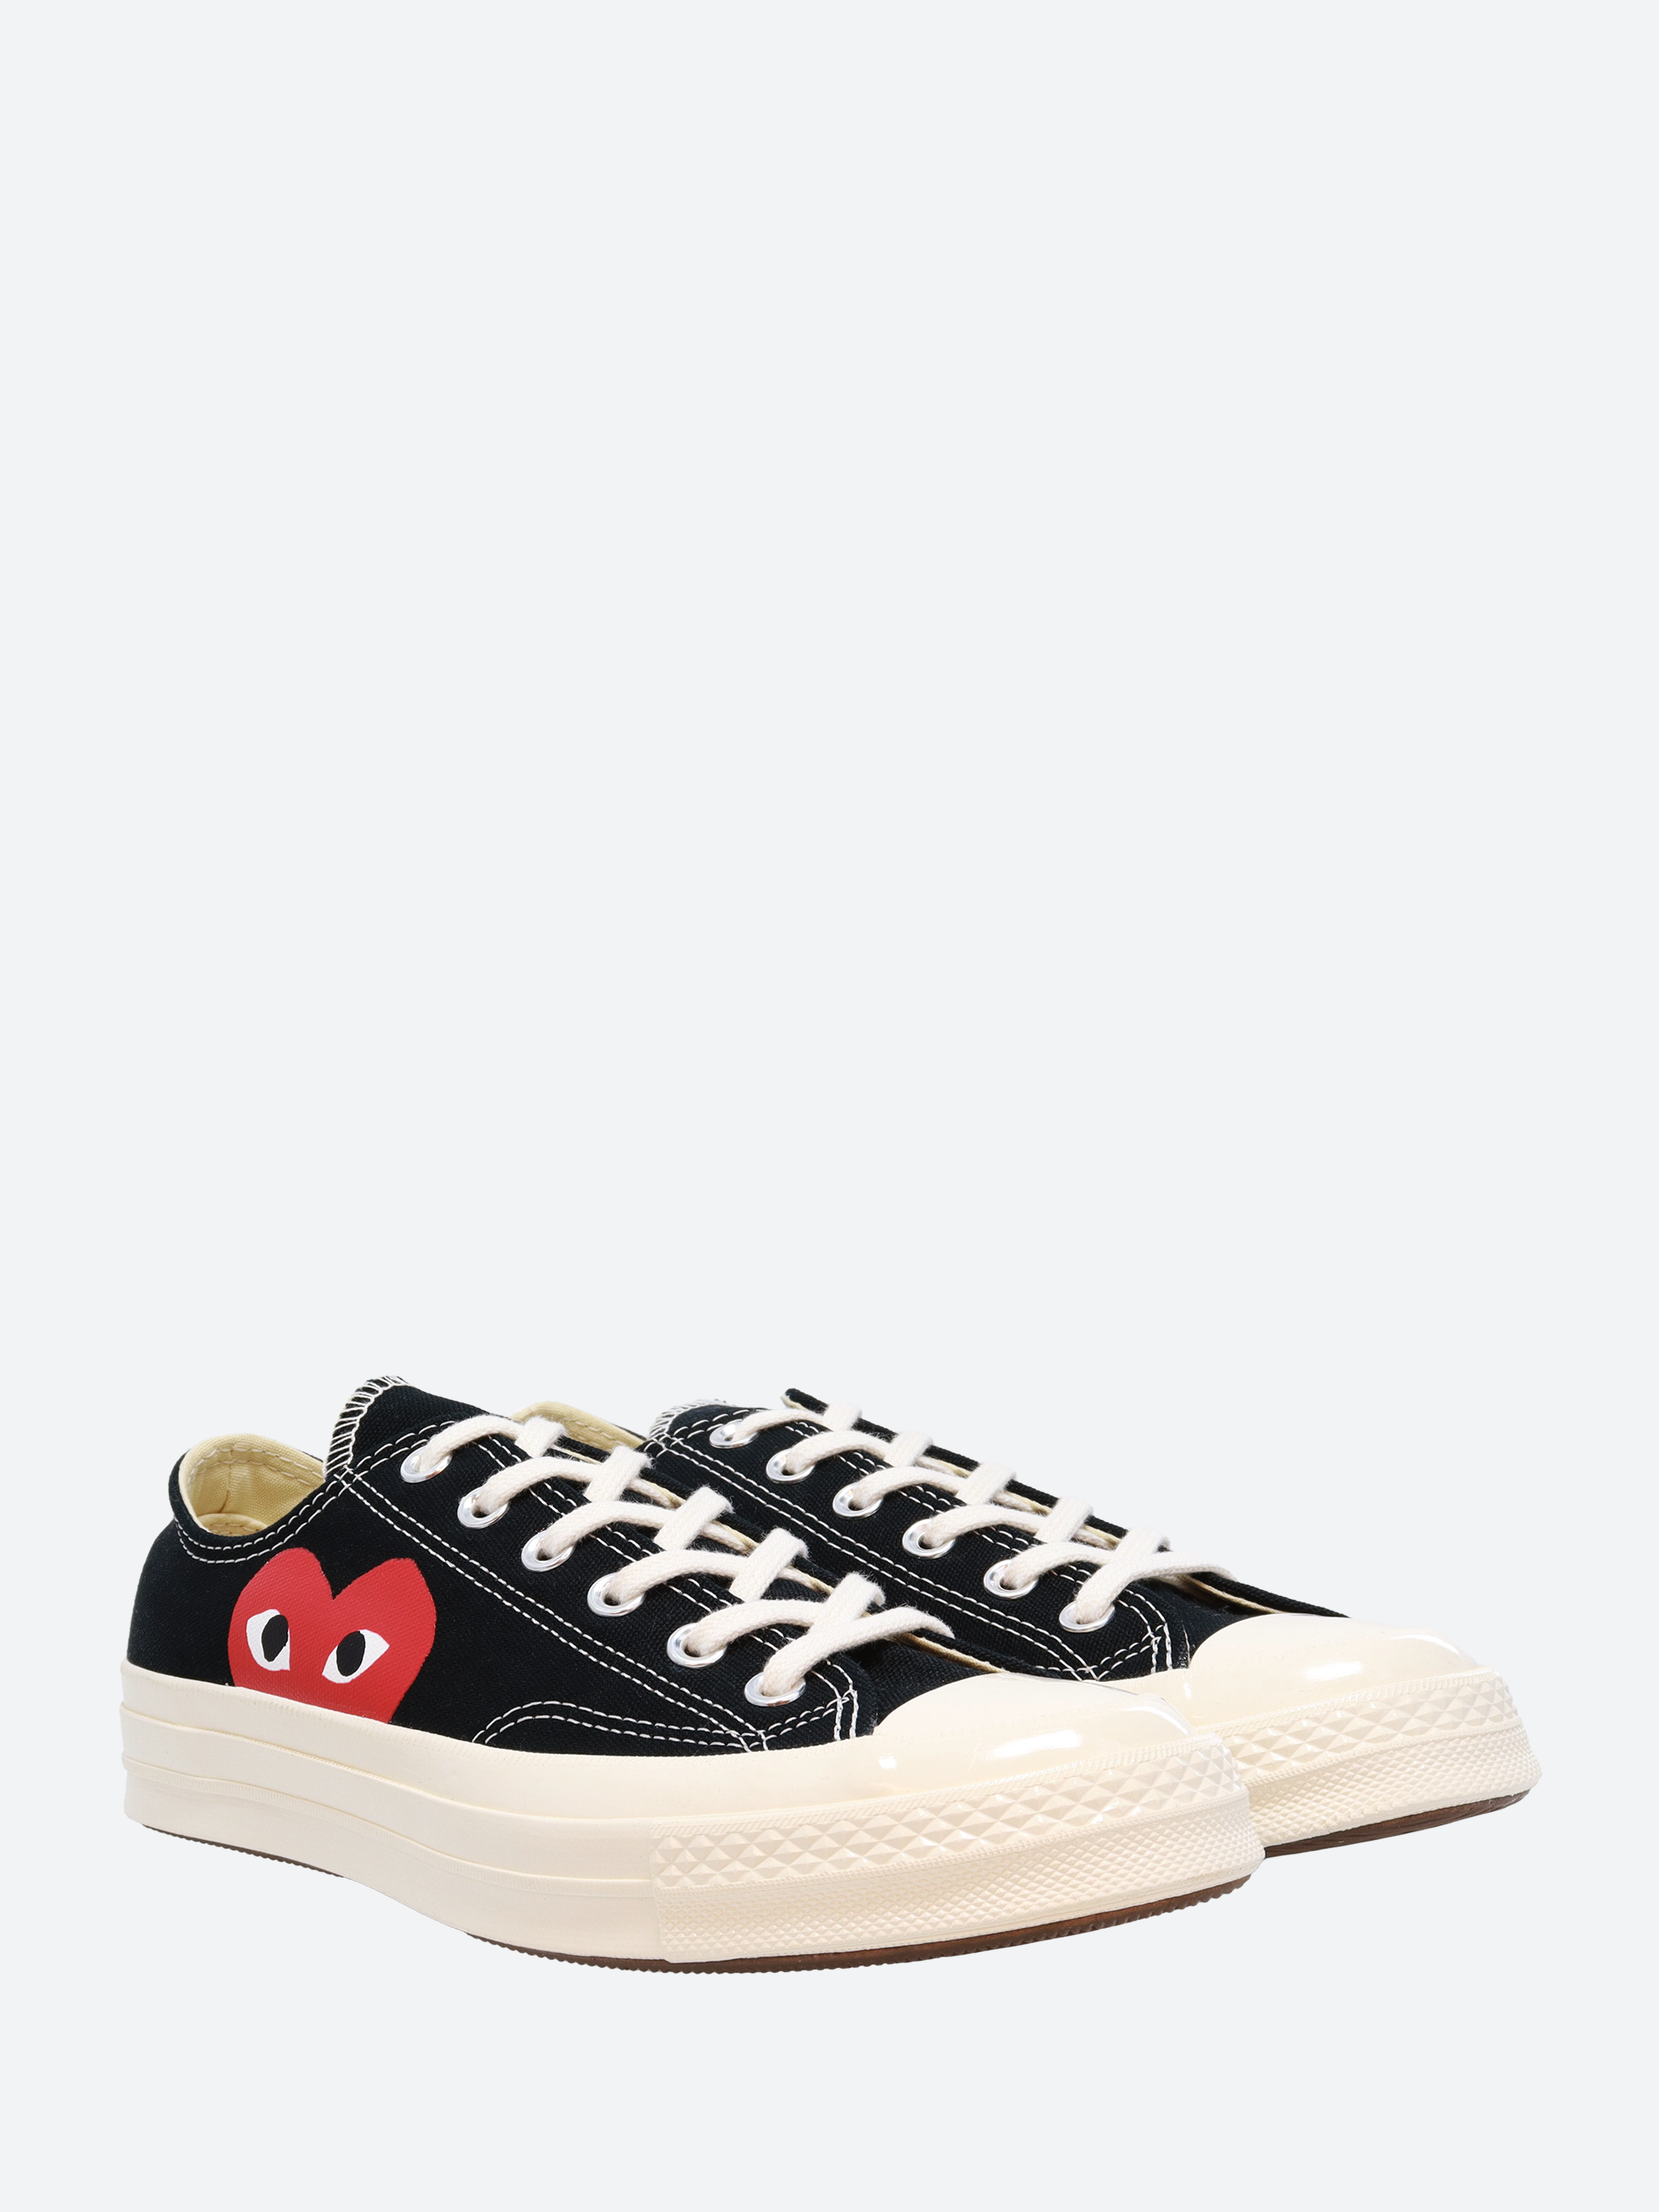 Red Heart Chuck 70 Low Top